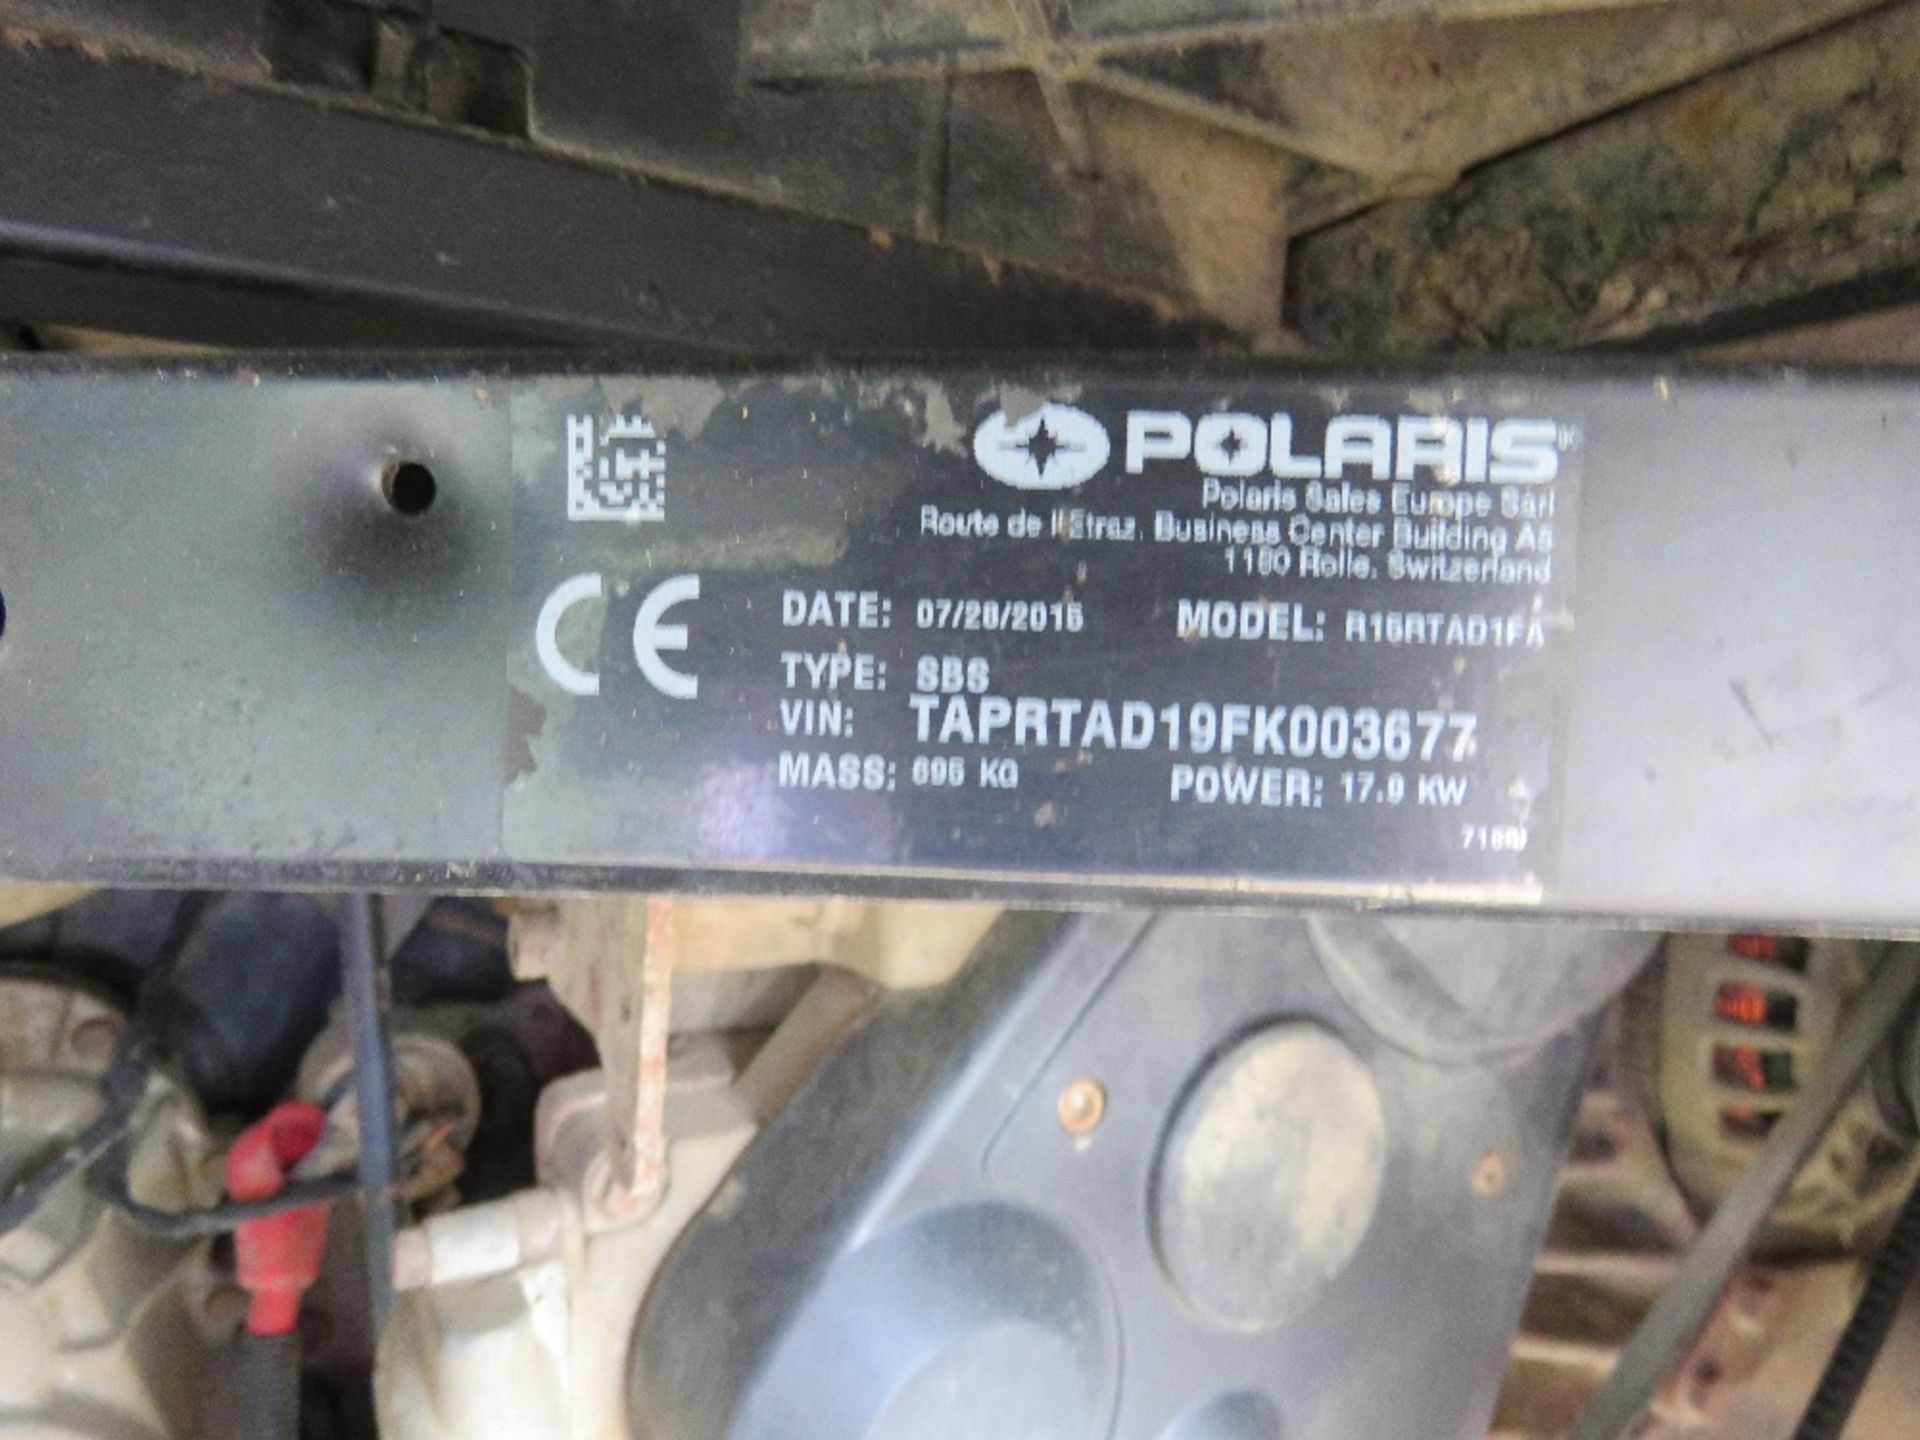 POLARIS RANGER DIESEL RTV REG:EU65 CLO. WHEN TESTED WAS SEEN TO DRIVE, STEER AND BRAKE......REQUIRES - Image 8 of 9